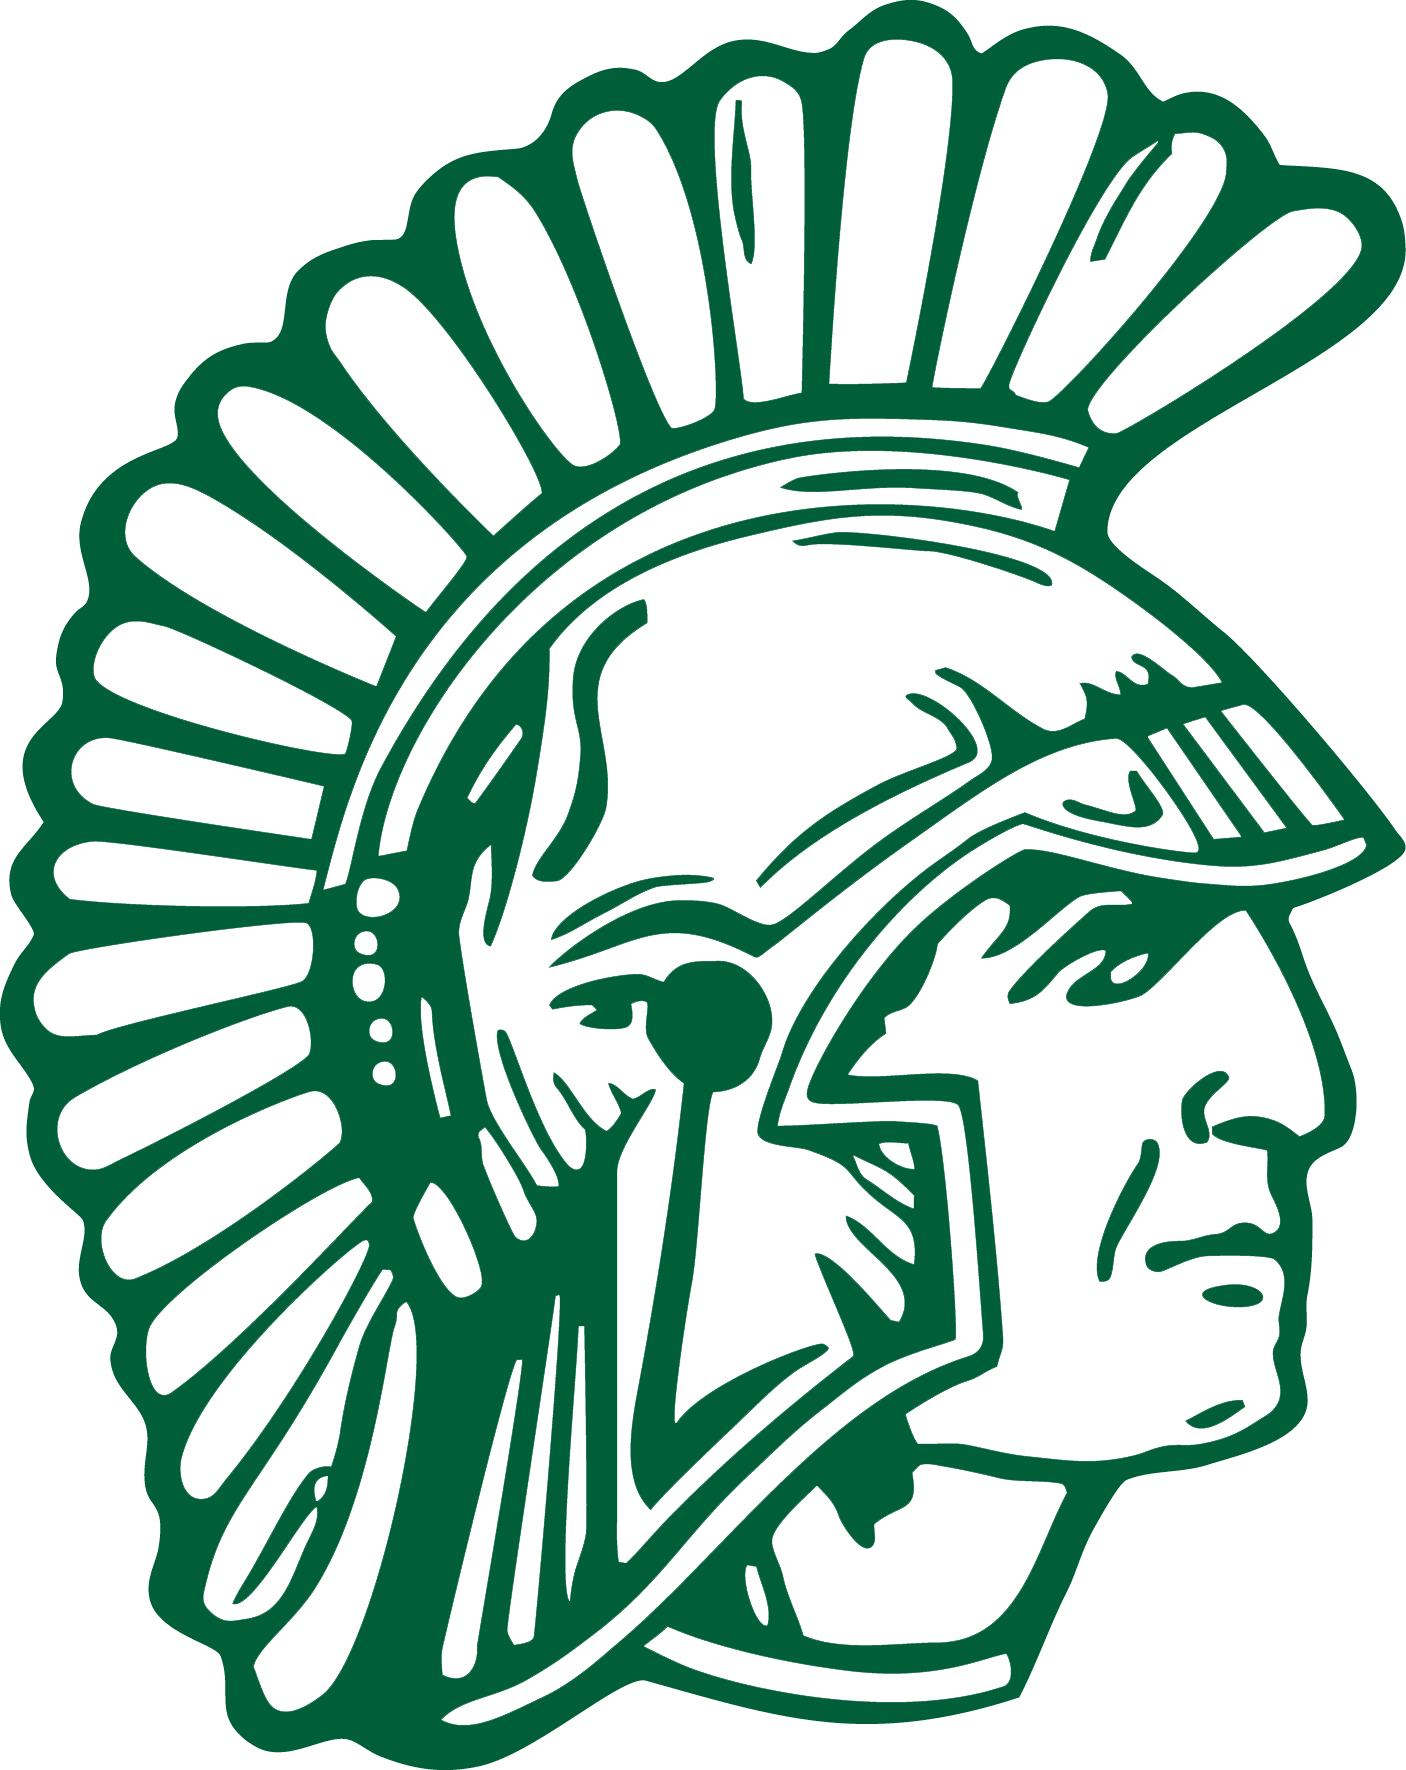 Jfk Learning Commons - Valley View Spartans Logo (1406x1770)